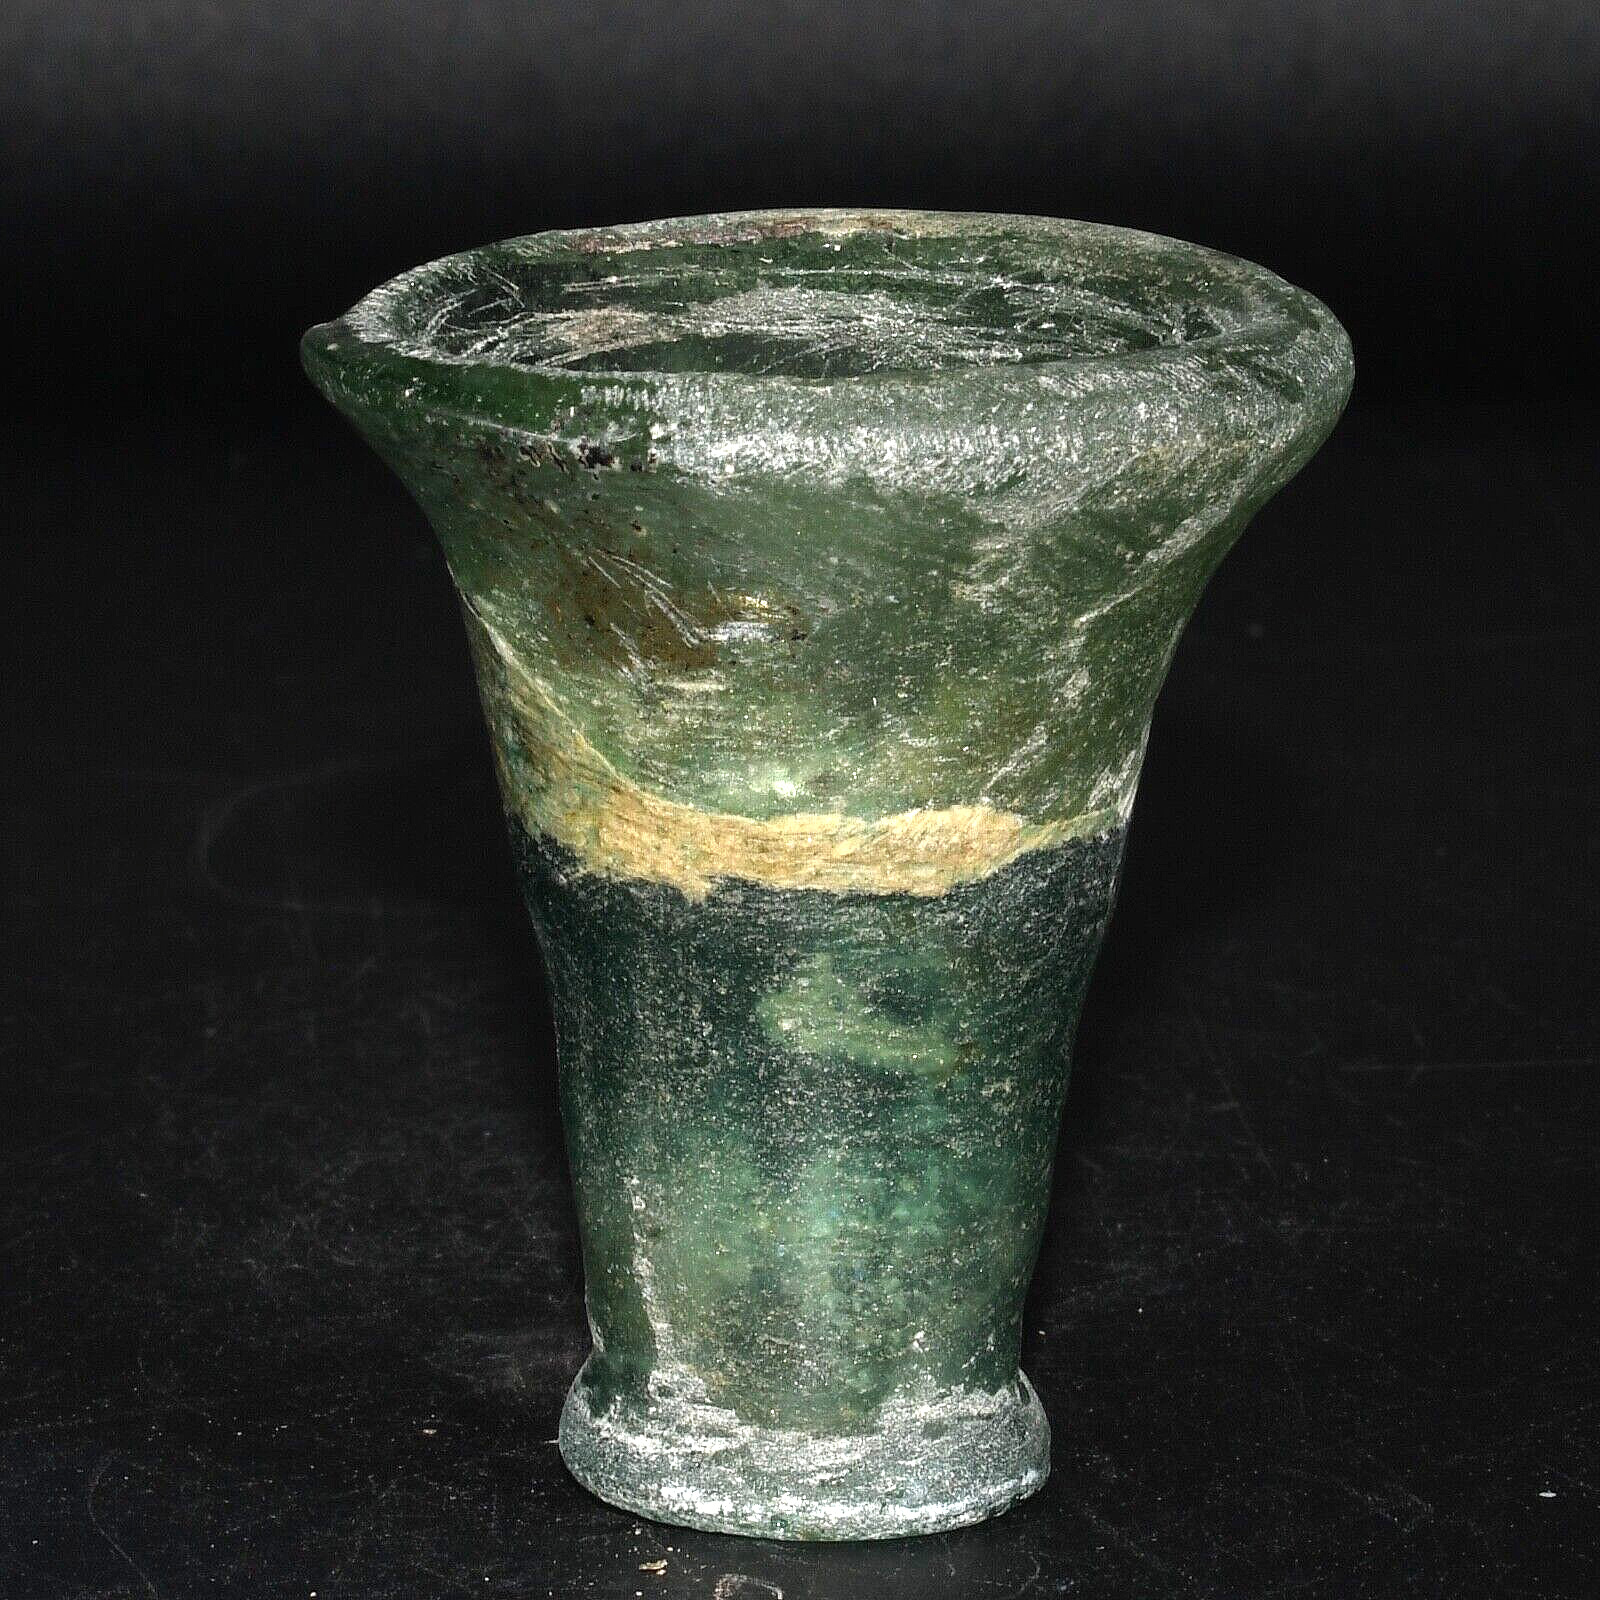 Authentic Ancient Eastern Roman Glass Cup Vessel Circa 1st - 3rd Century AD